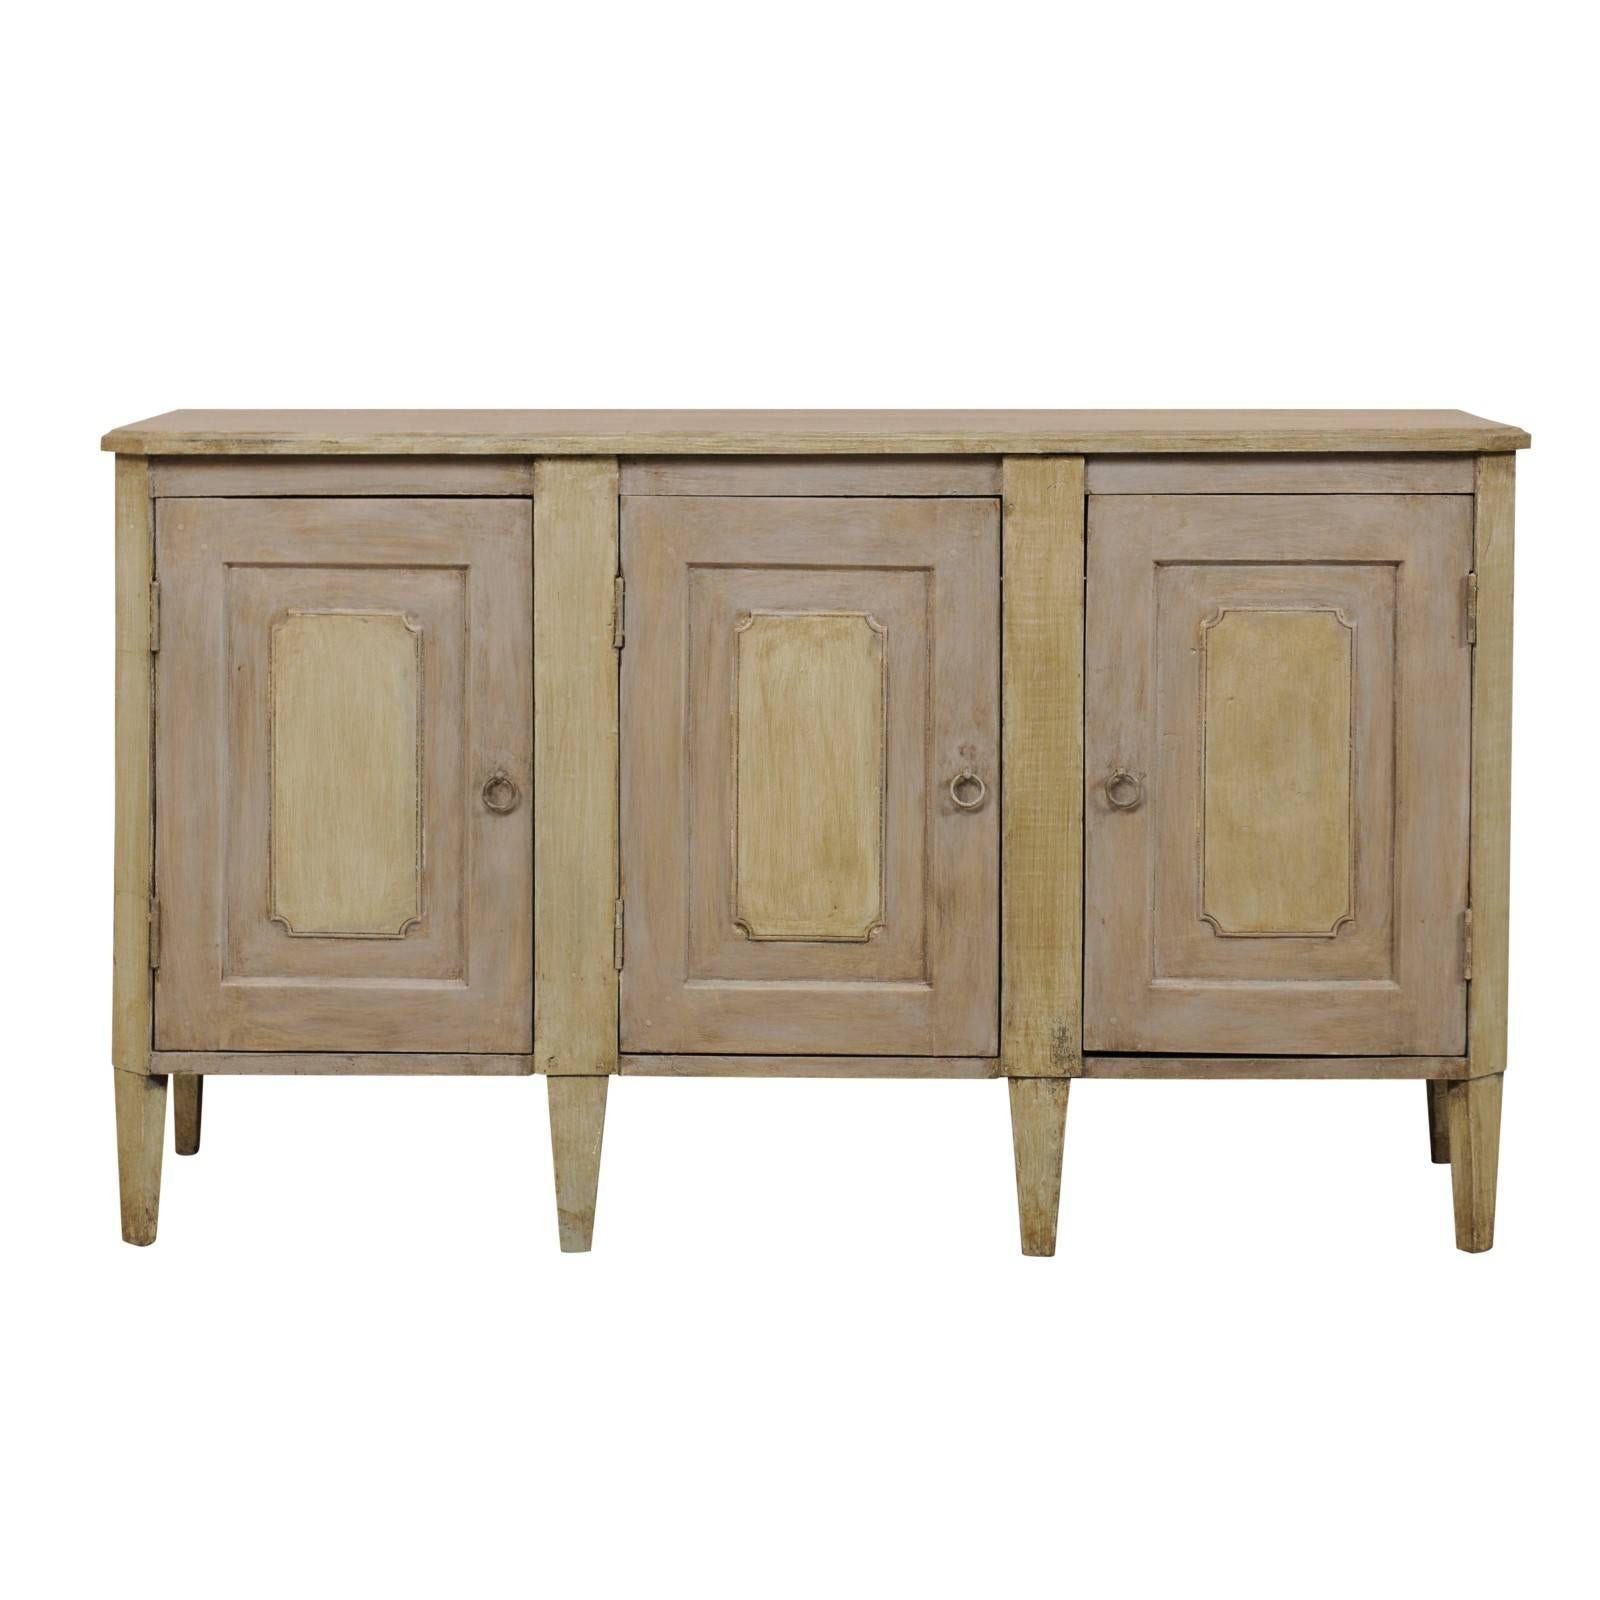 Vintage Painted Wood Buffet Sideboard Cabinet in Grey with Soft Green Accents